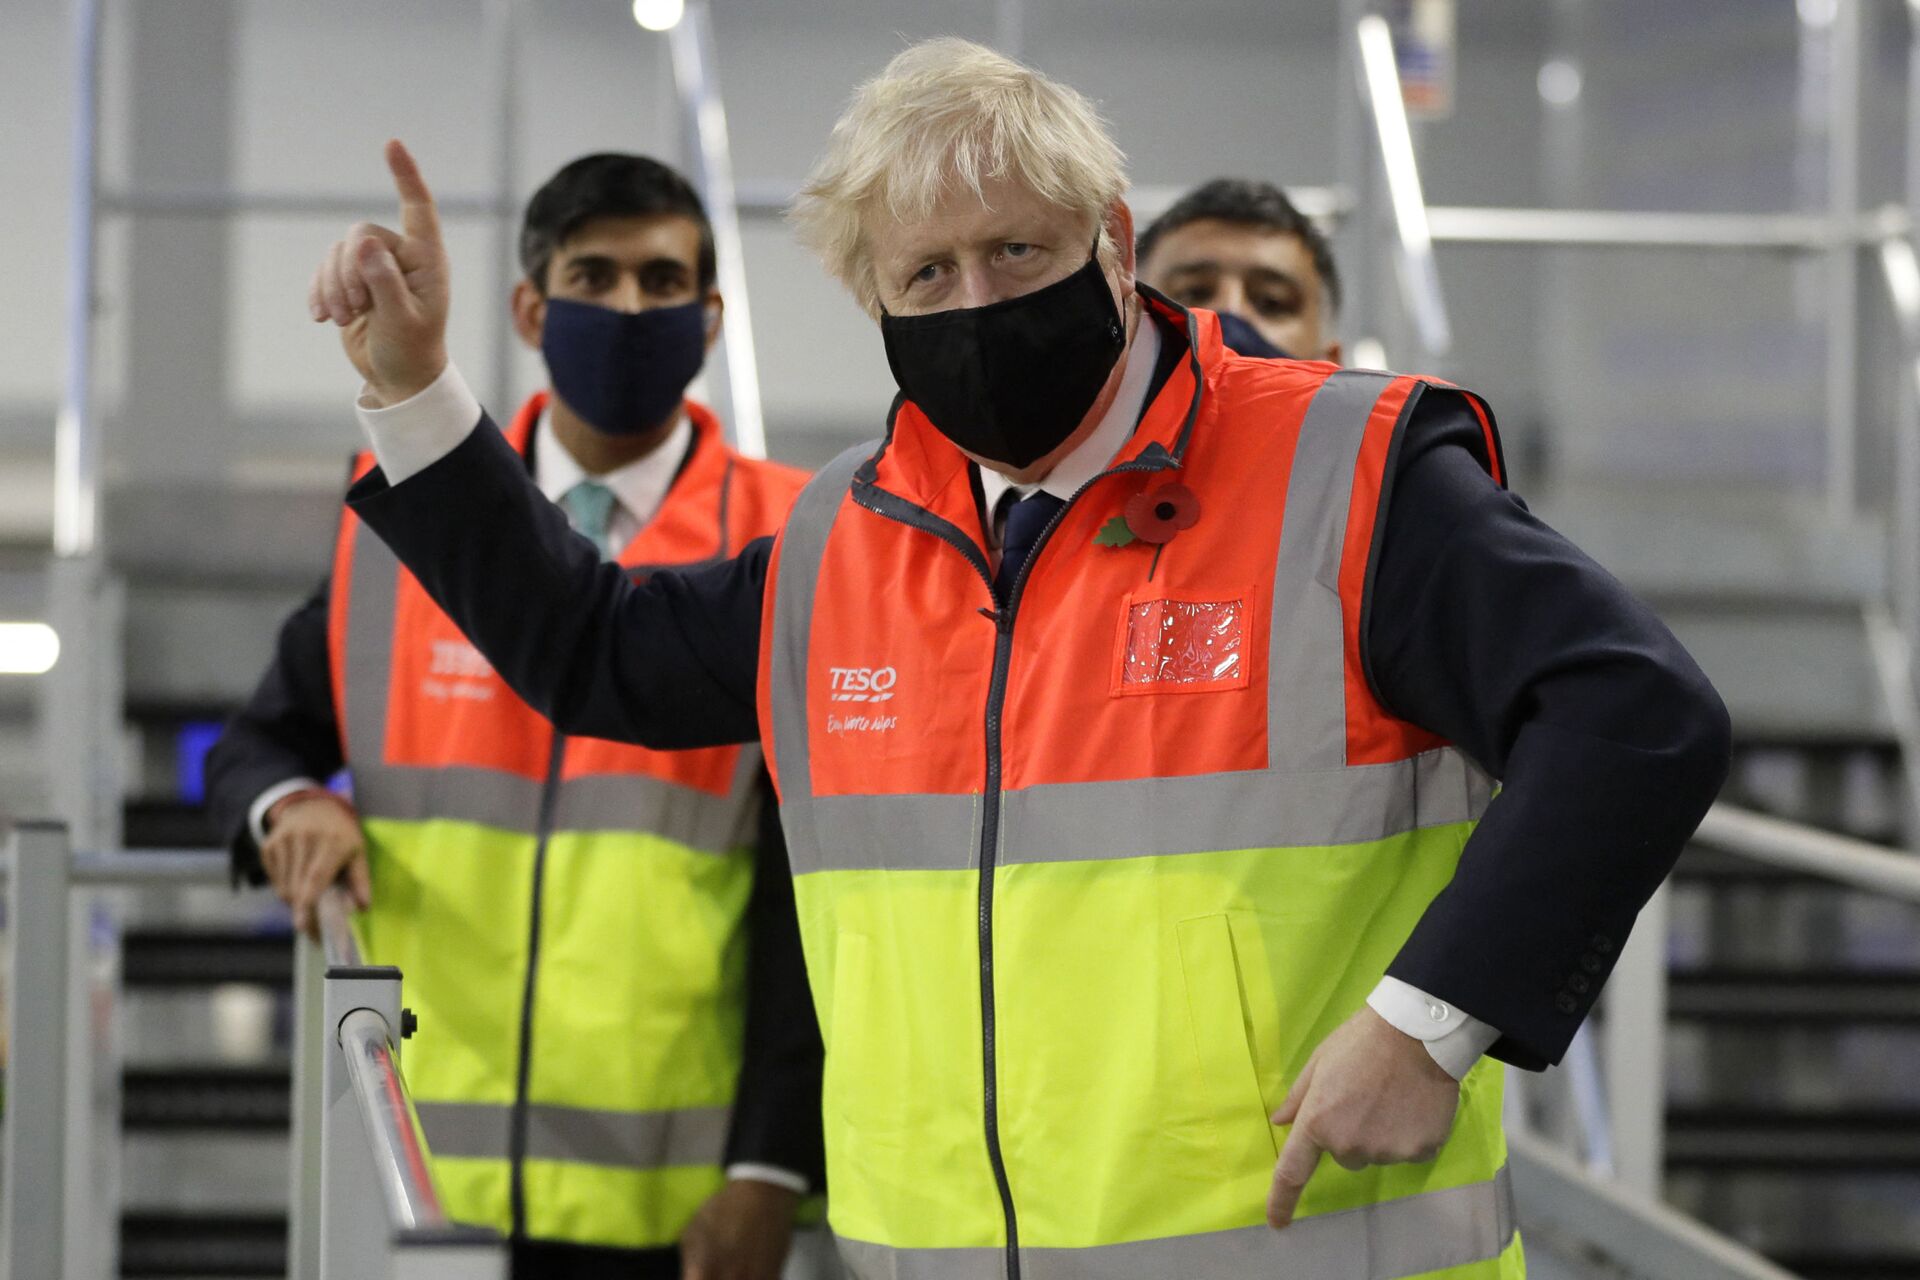 Britain's Prime Minister Boris Johnson (C) gestures during a visit to a tesco.com distribution centre in London with Britain's Chancellor of the Exchequer Rishi Sunak (L) on November 11, 2020 - Sputnik International, 1920, 07.09.2021